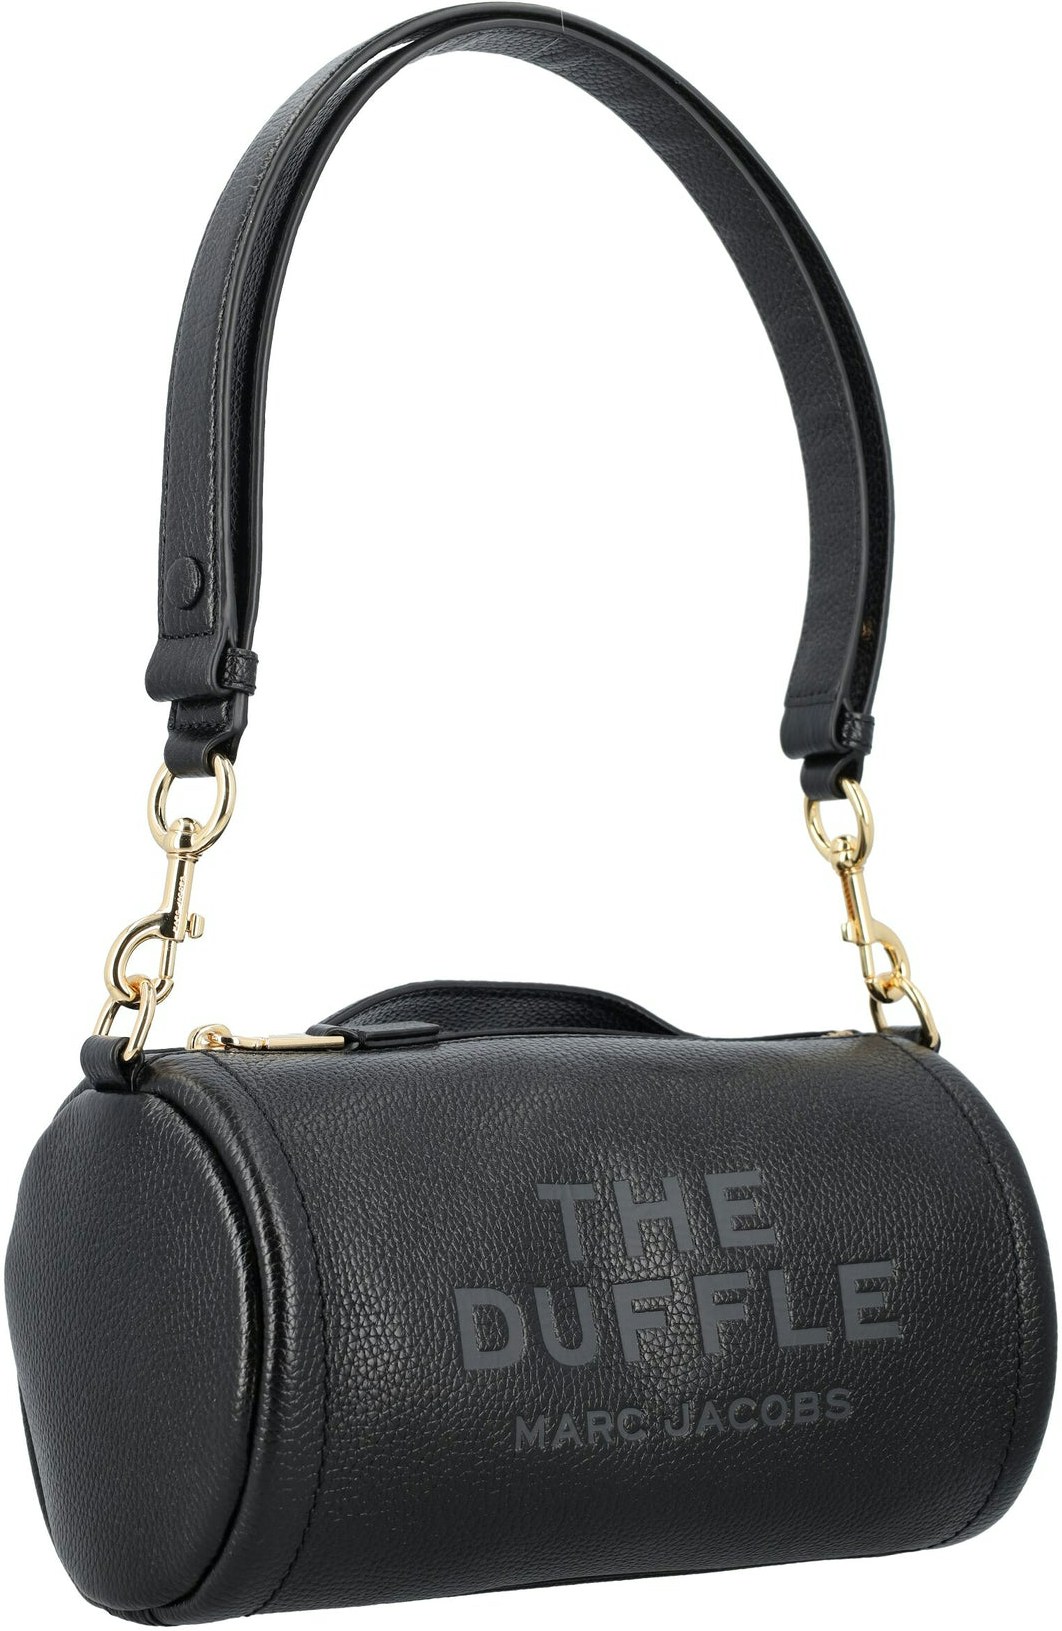 Marc Jacobs The Leather Duffle Bag